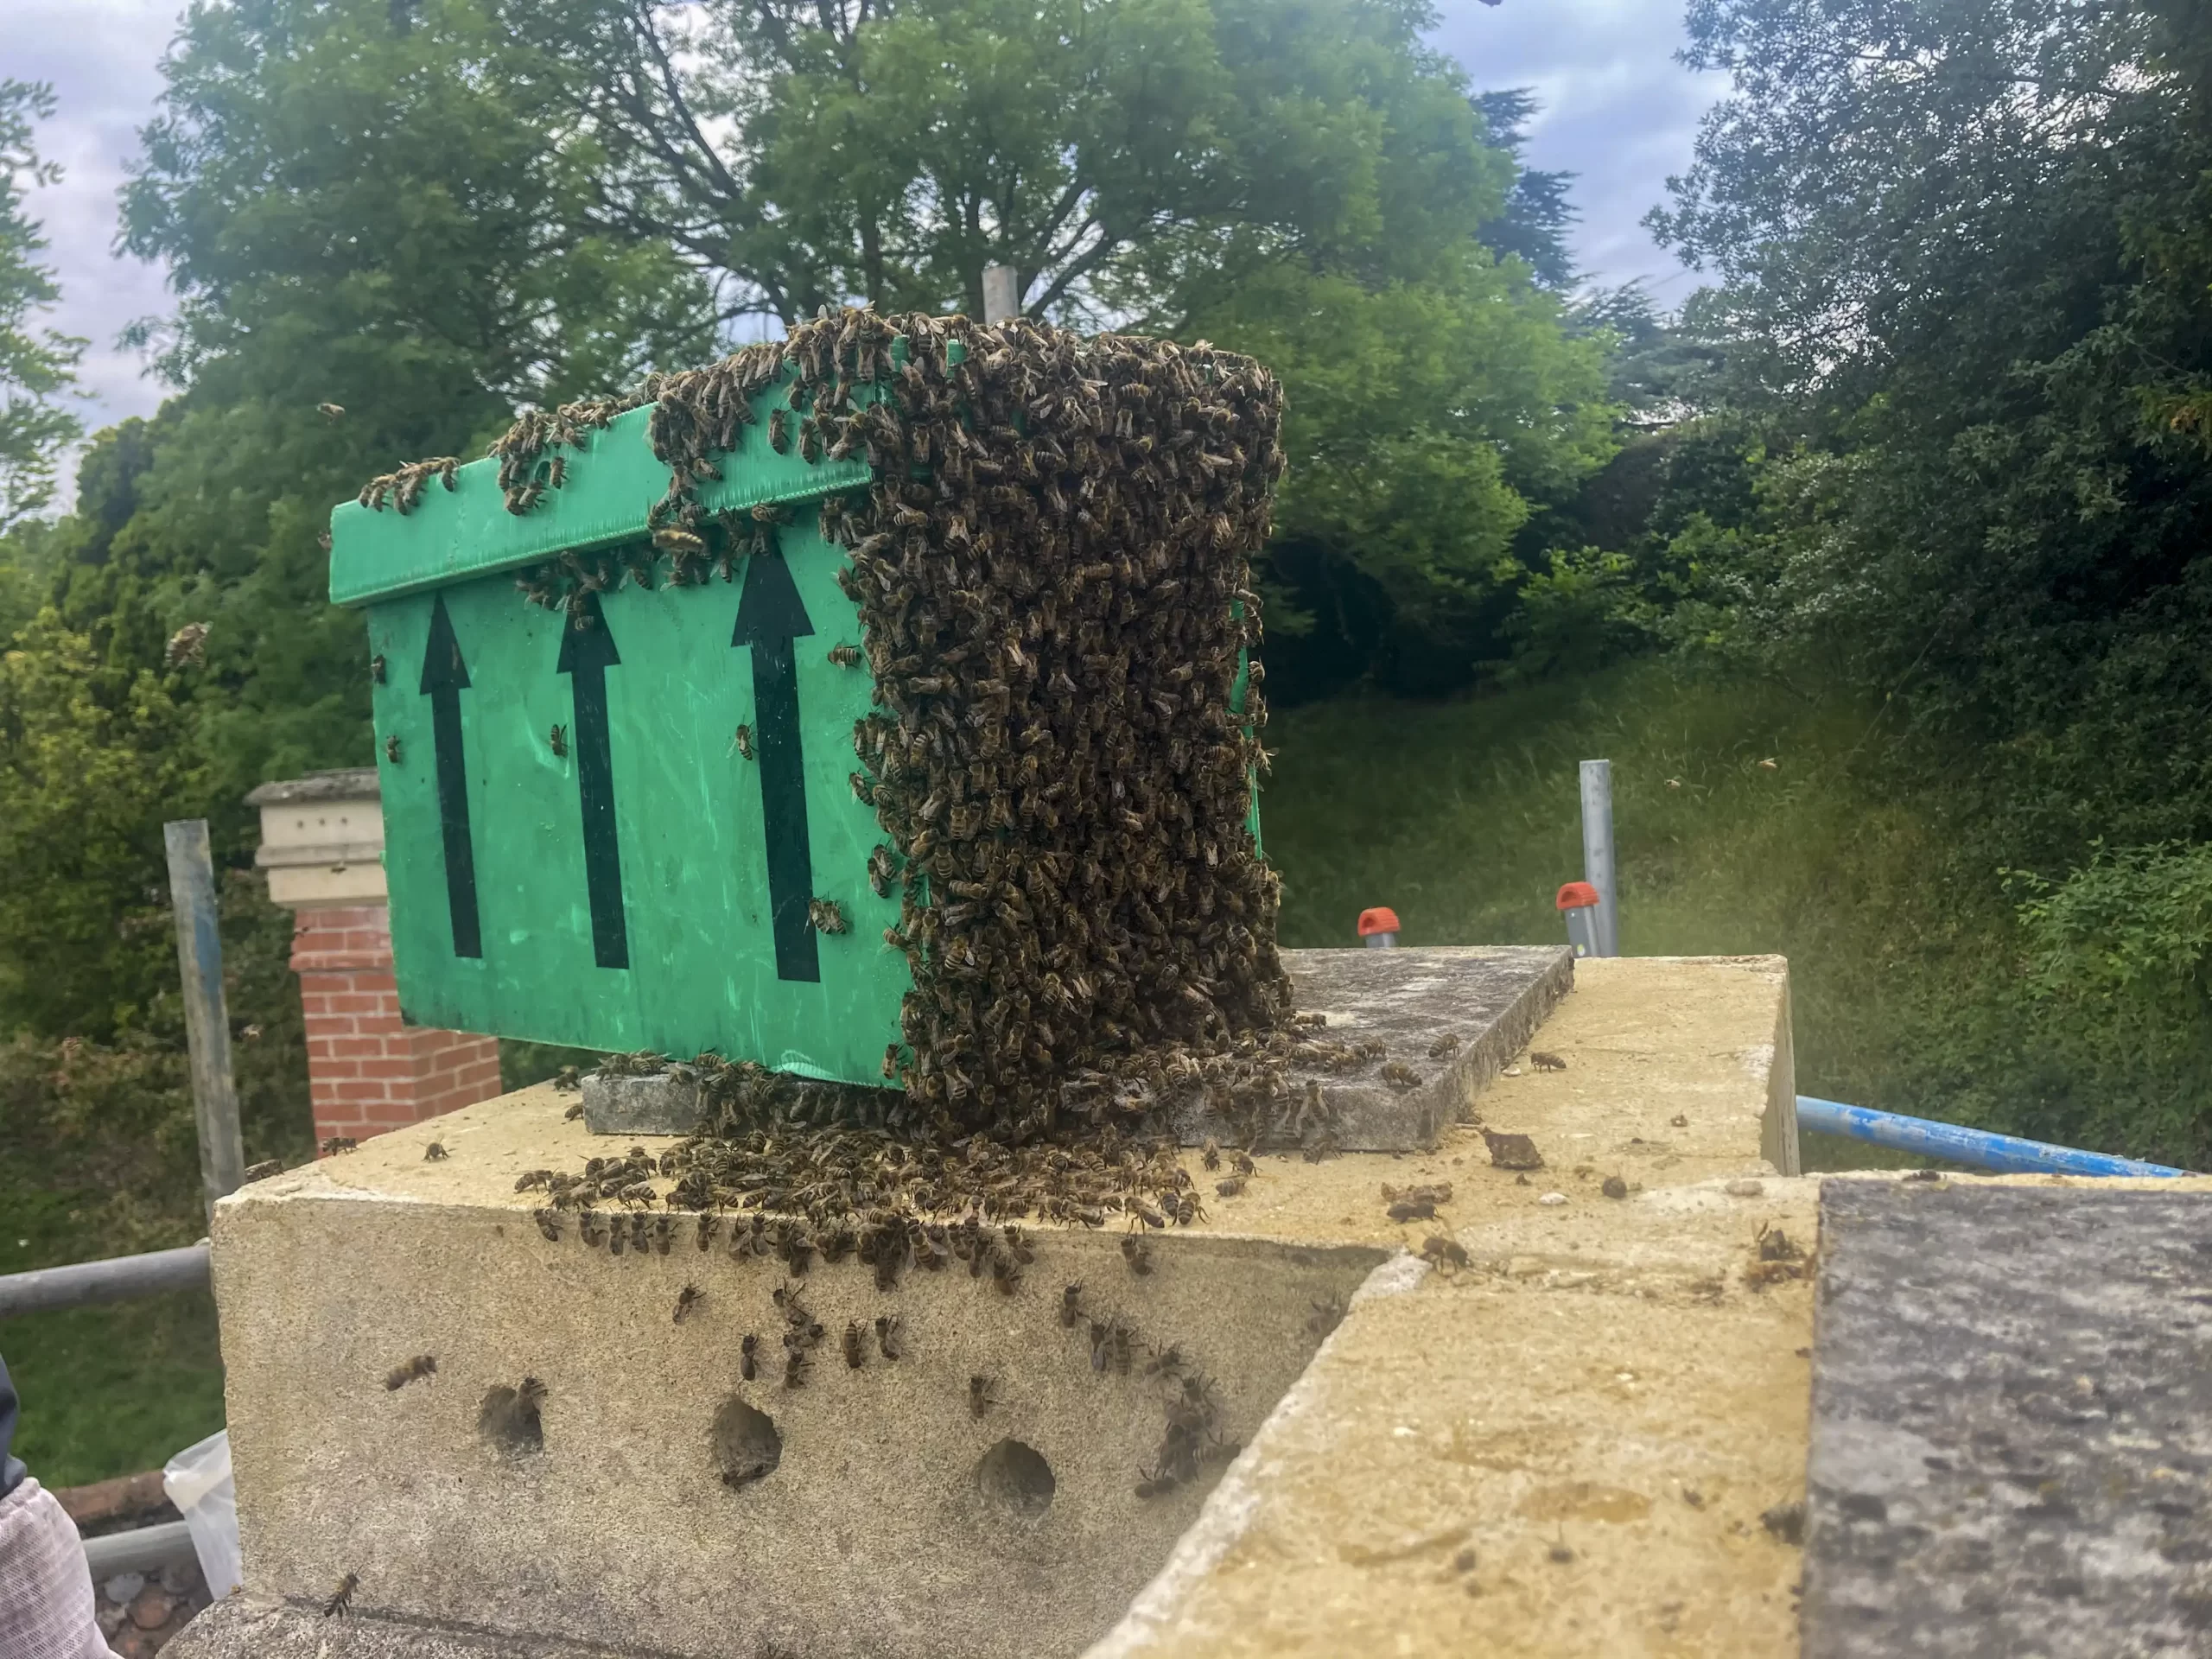 Step 8: Transport Bees